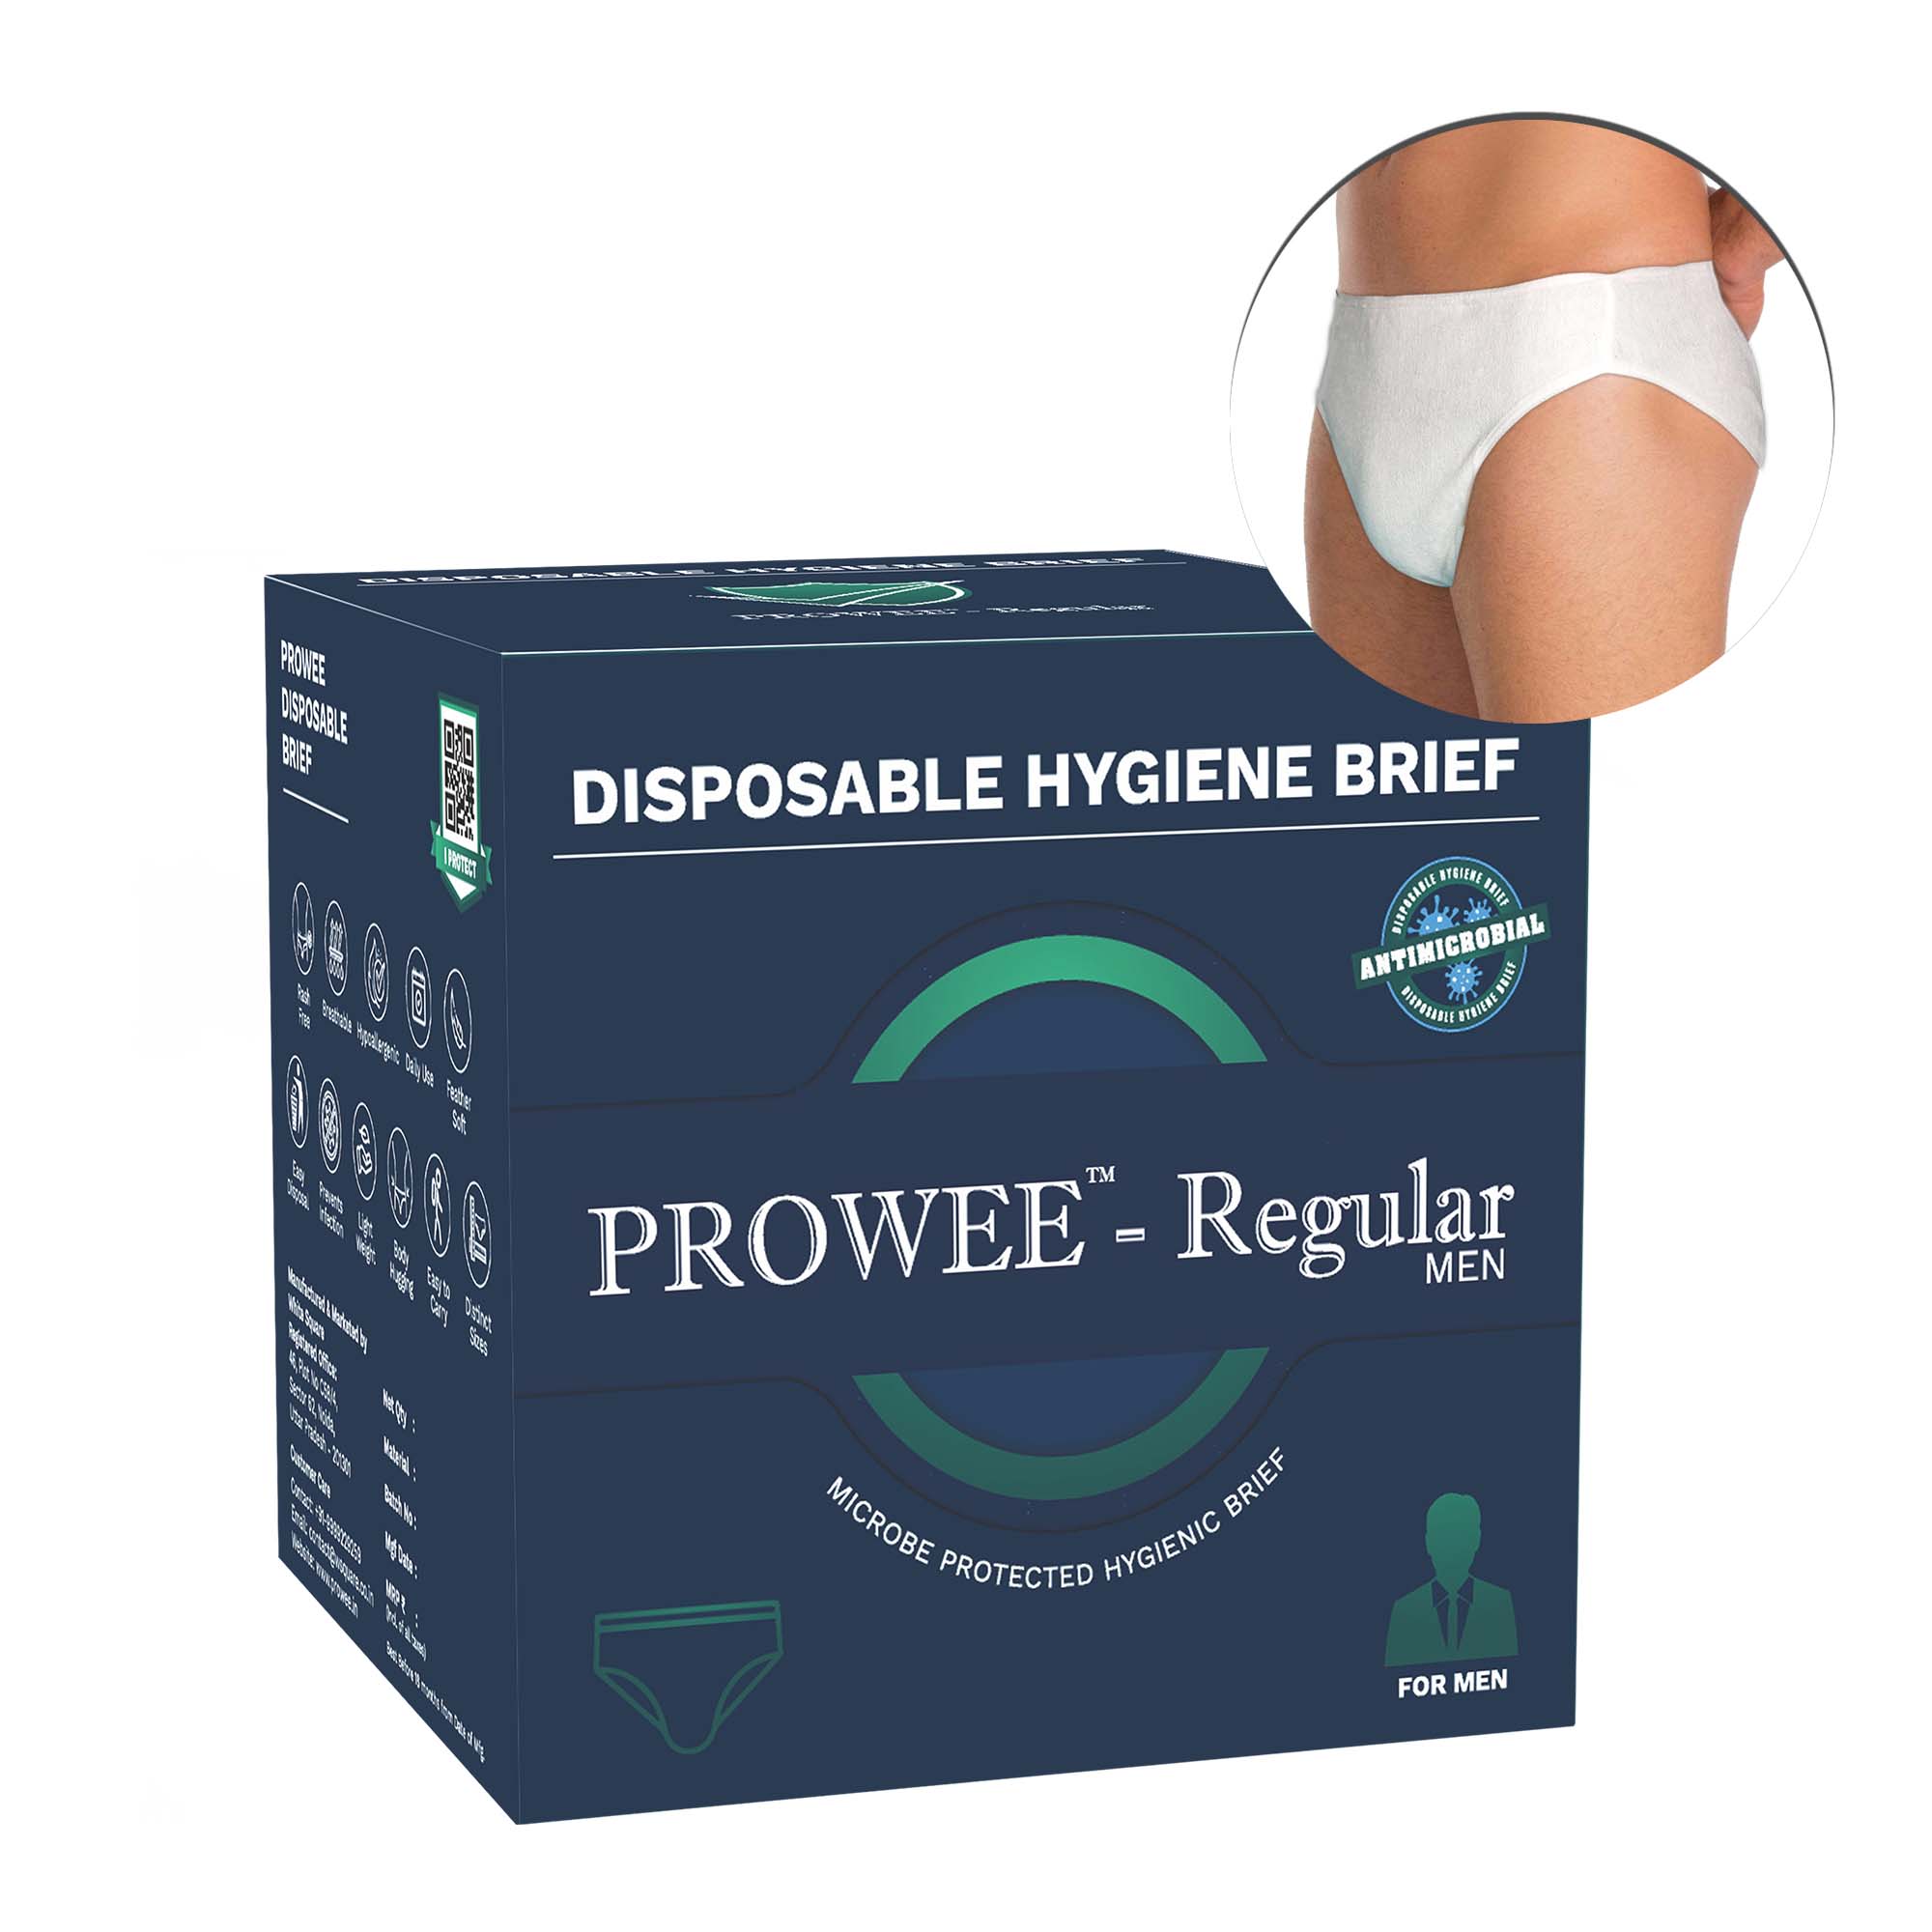 PROWEE™️ Disposable Brief for Men|Travel, Trekking, Camping, Office, Spa, Hospital Stay|Specially Designed for Men (5 pcs Pack)|Design Patent No. 336859-001 |Protection Wear for Better Hygiene